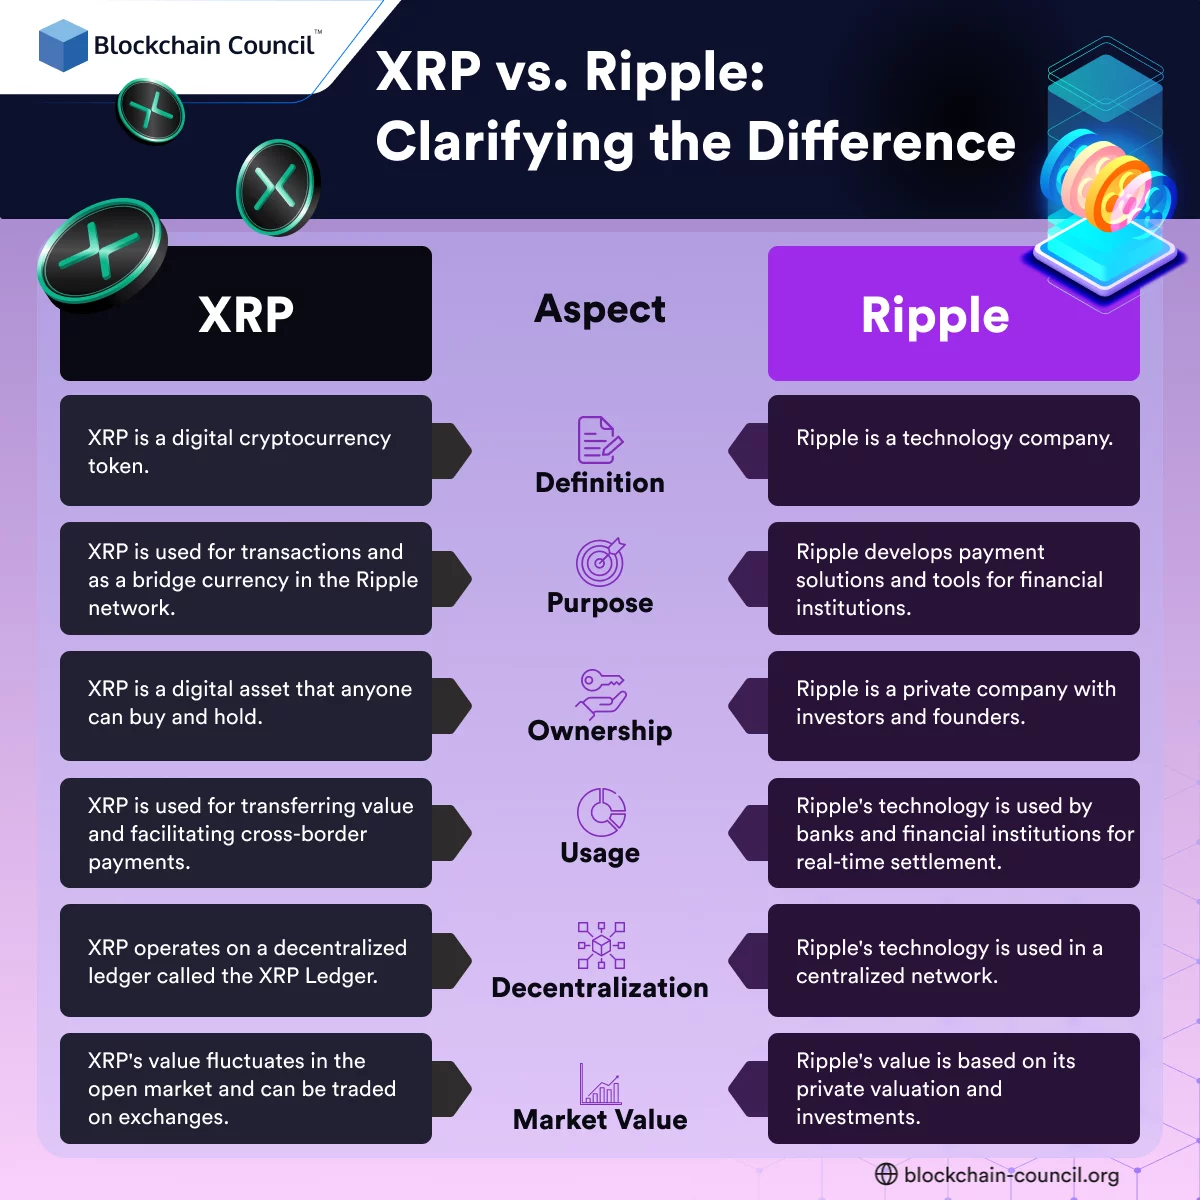 XRP vs. Ripple: Clarifying the Difference